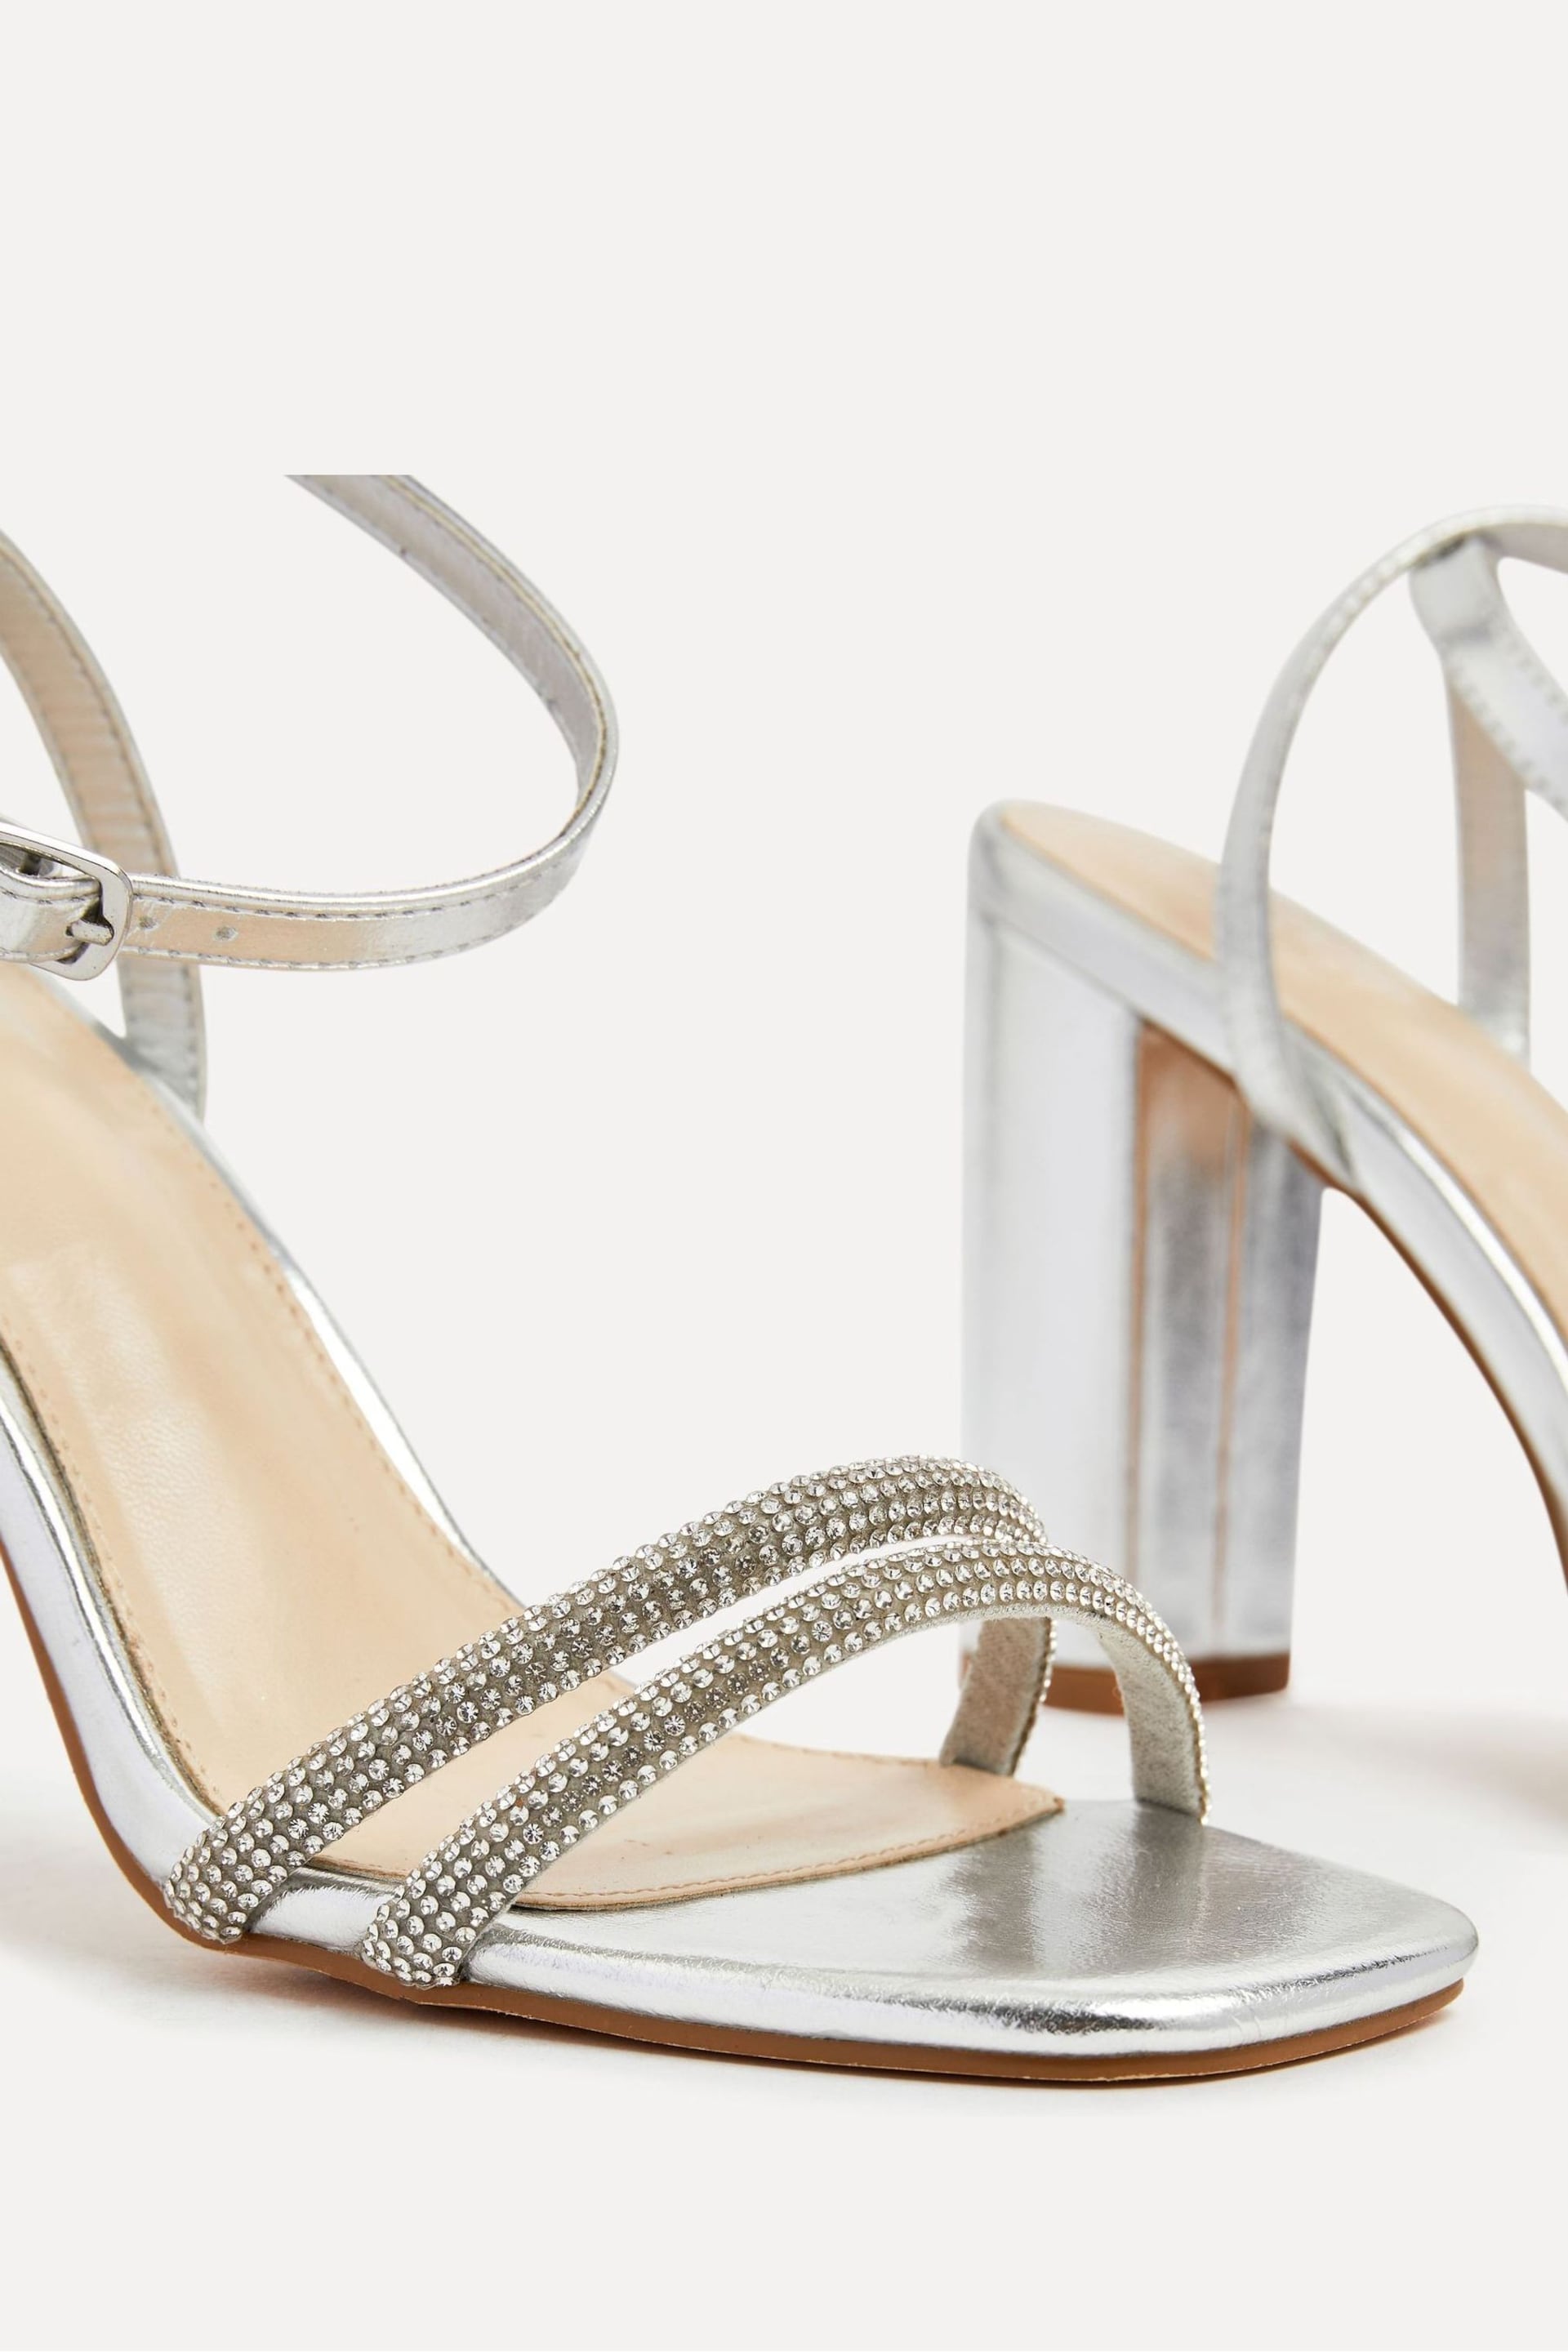 Linzi Silver Imera Block Heeled Sandals With Diamante Front Strap - Image 6 of 7